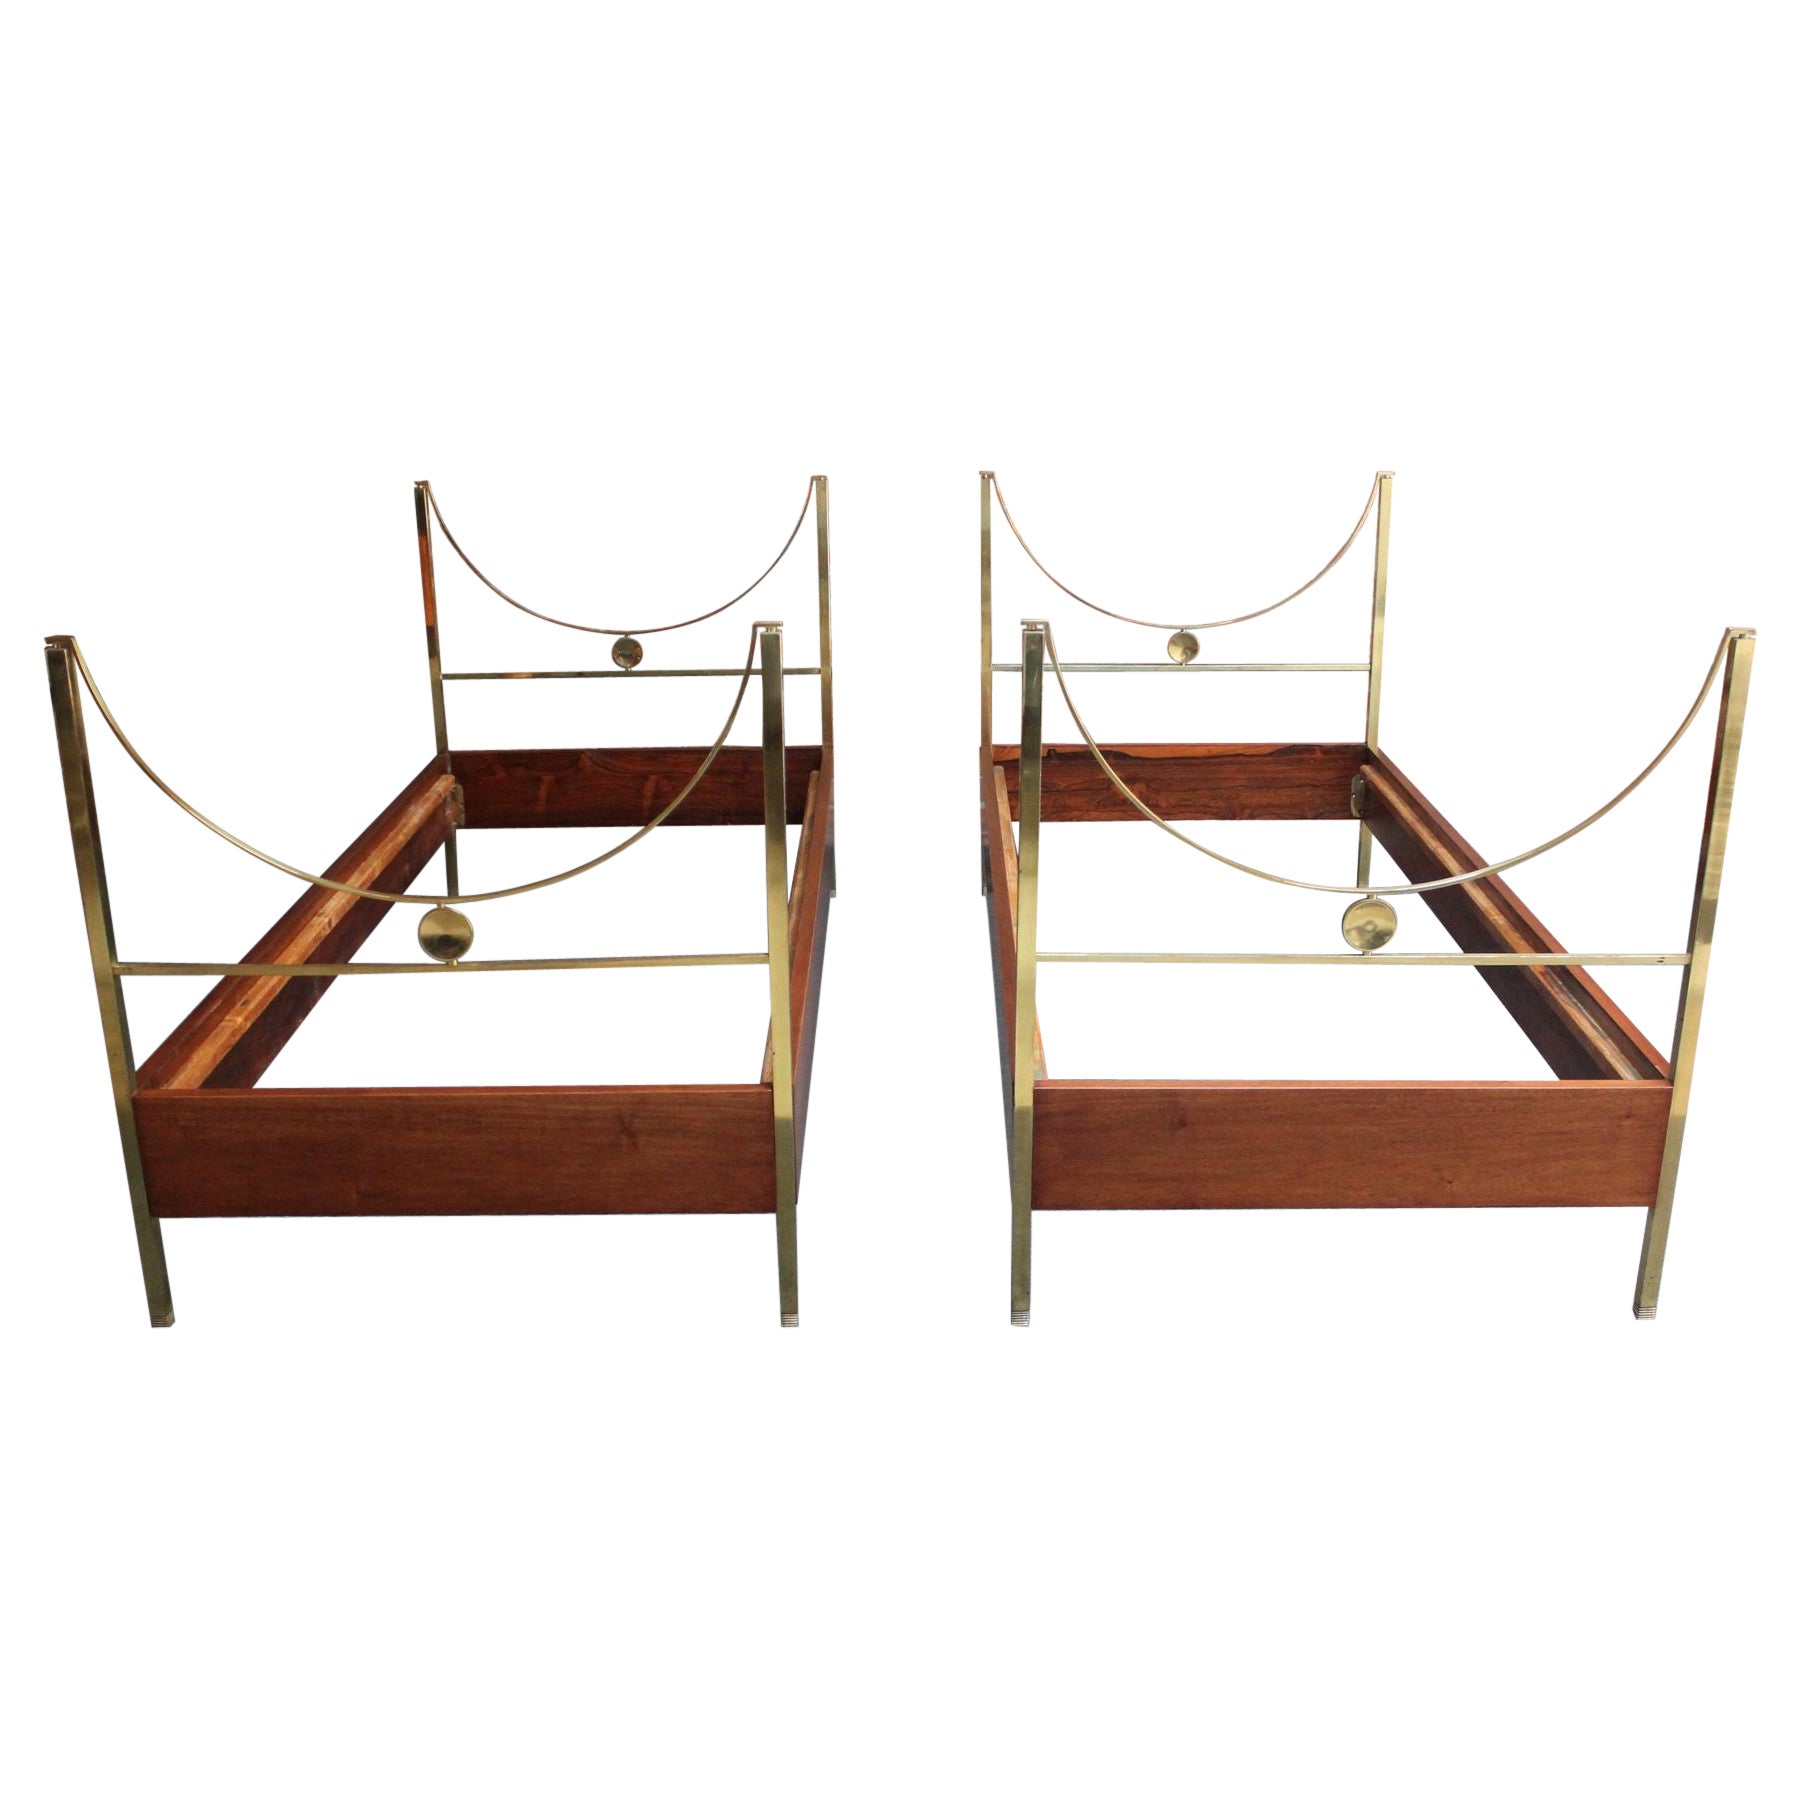 Pair of Vintage Italian Mahogany and Brass Beds by Carlo de Carli for Sormani For Sale